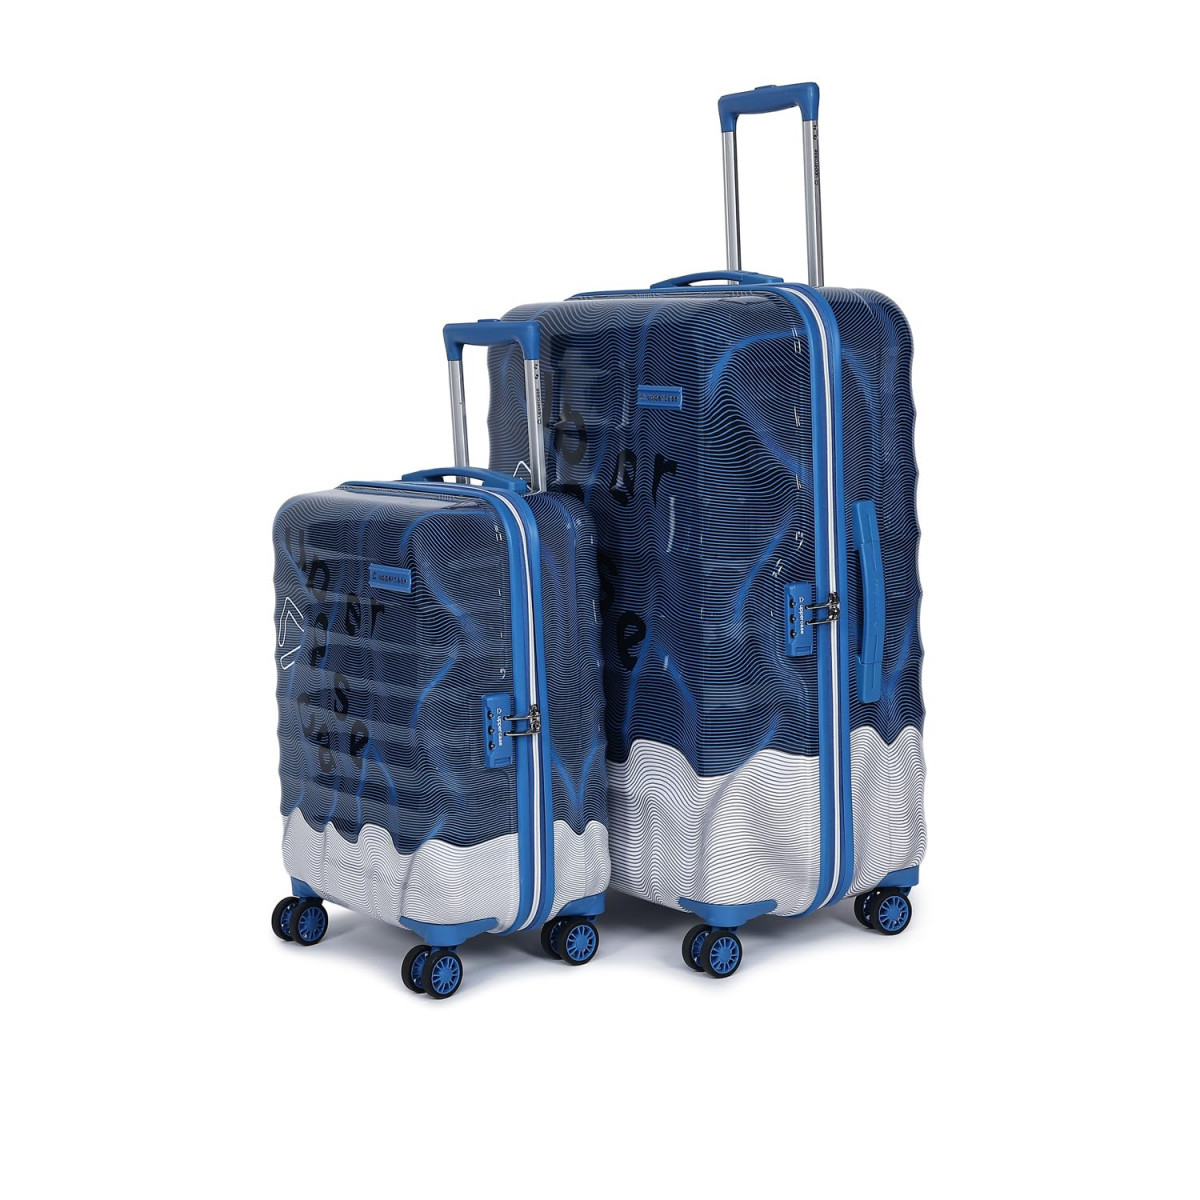 uppercase Ripple Trolley Bag Set Of 2 SL Cabin  Check-In Trolley Bag Hardsided Polycarbonate Luggage Combination Lock 8 Wheel Suitcase 2000 Days Warranty Blue 31 X 53 X 755 Cm Spinner